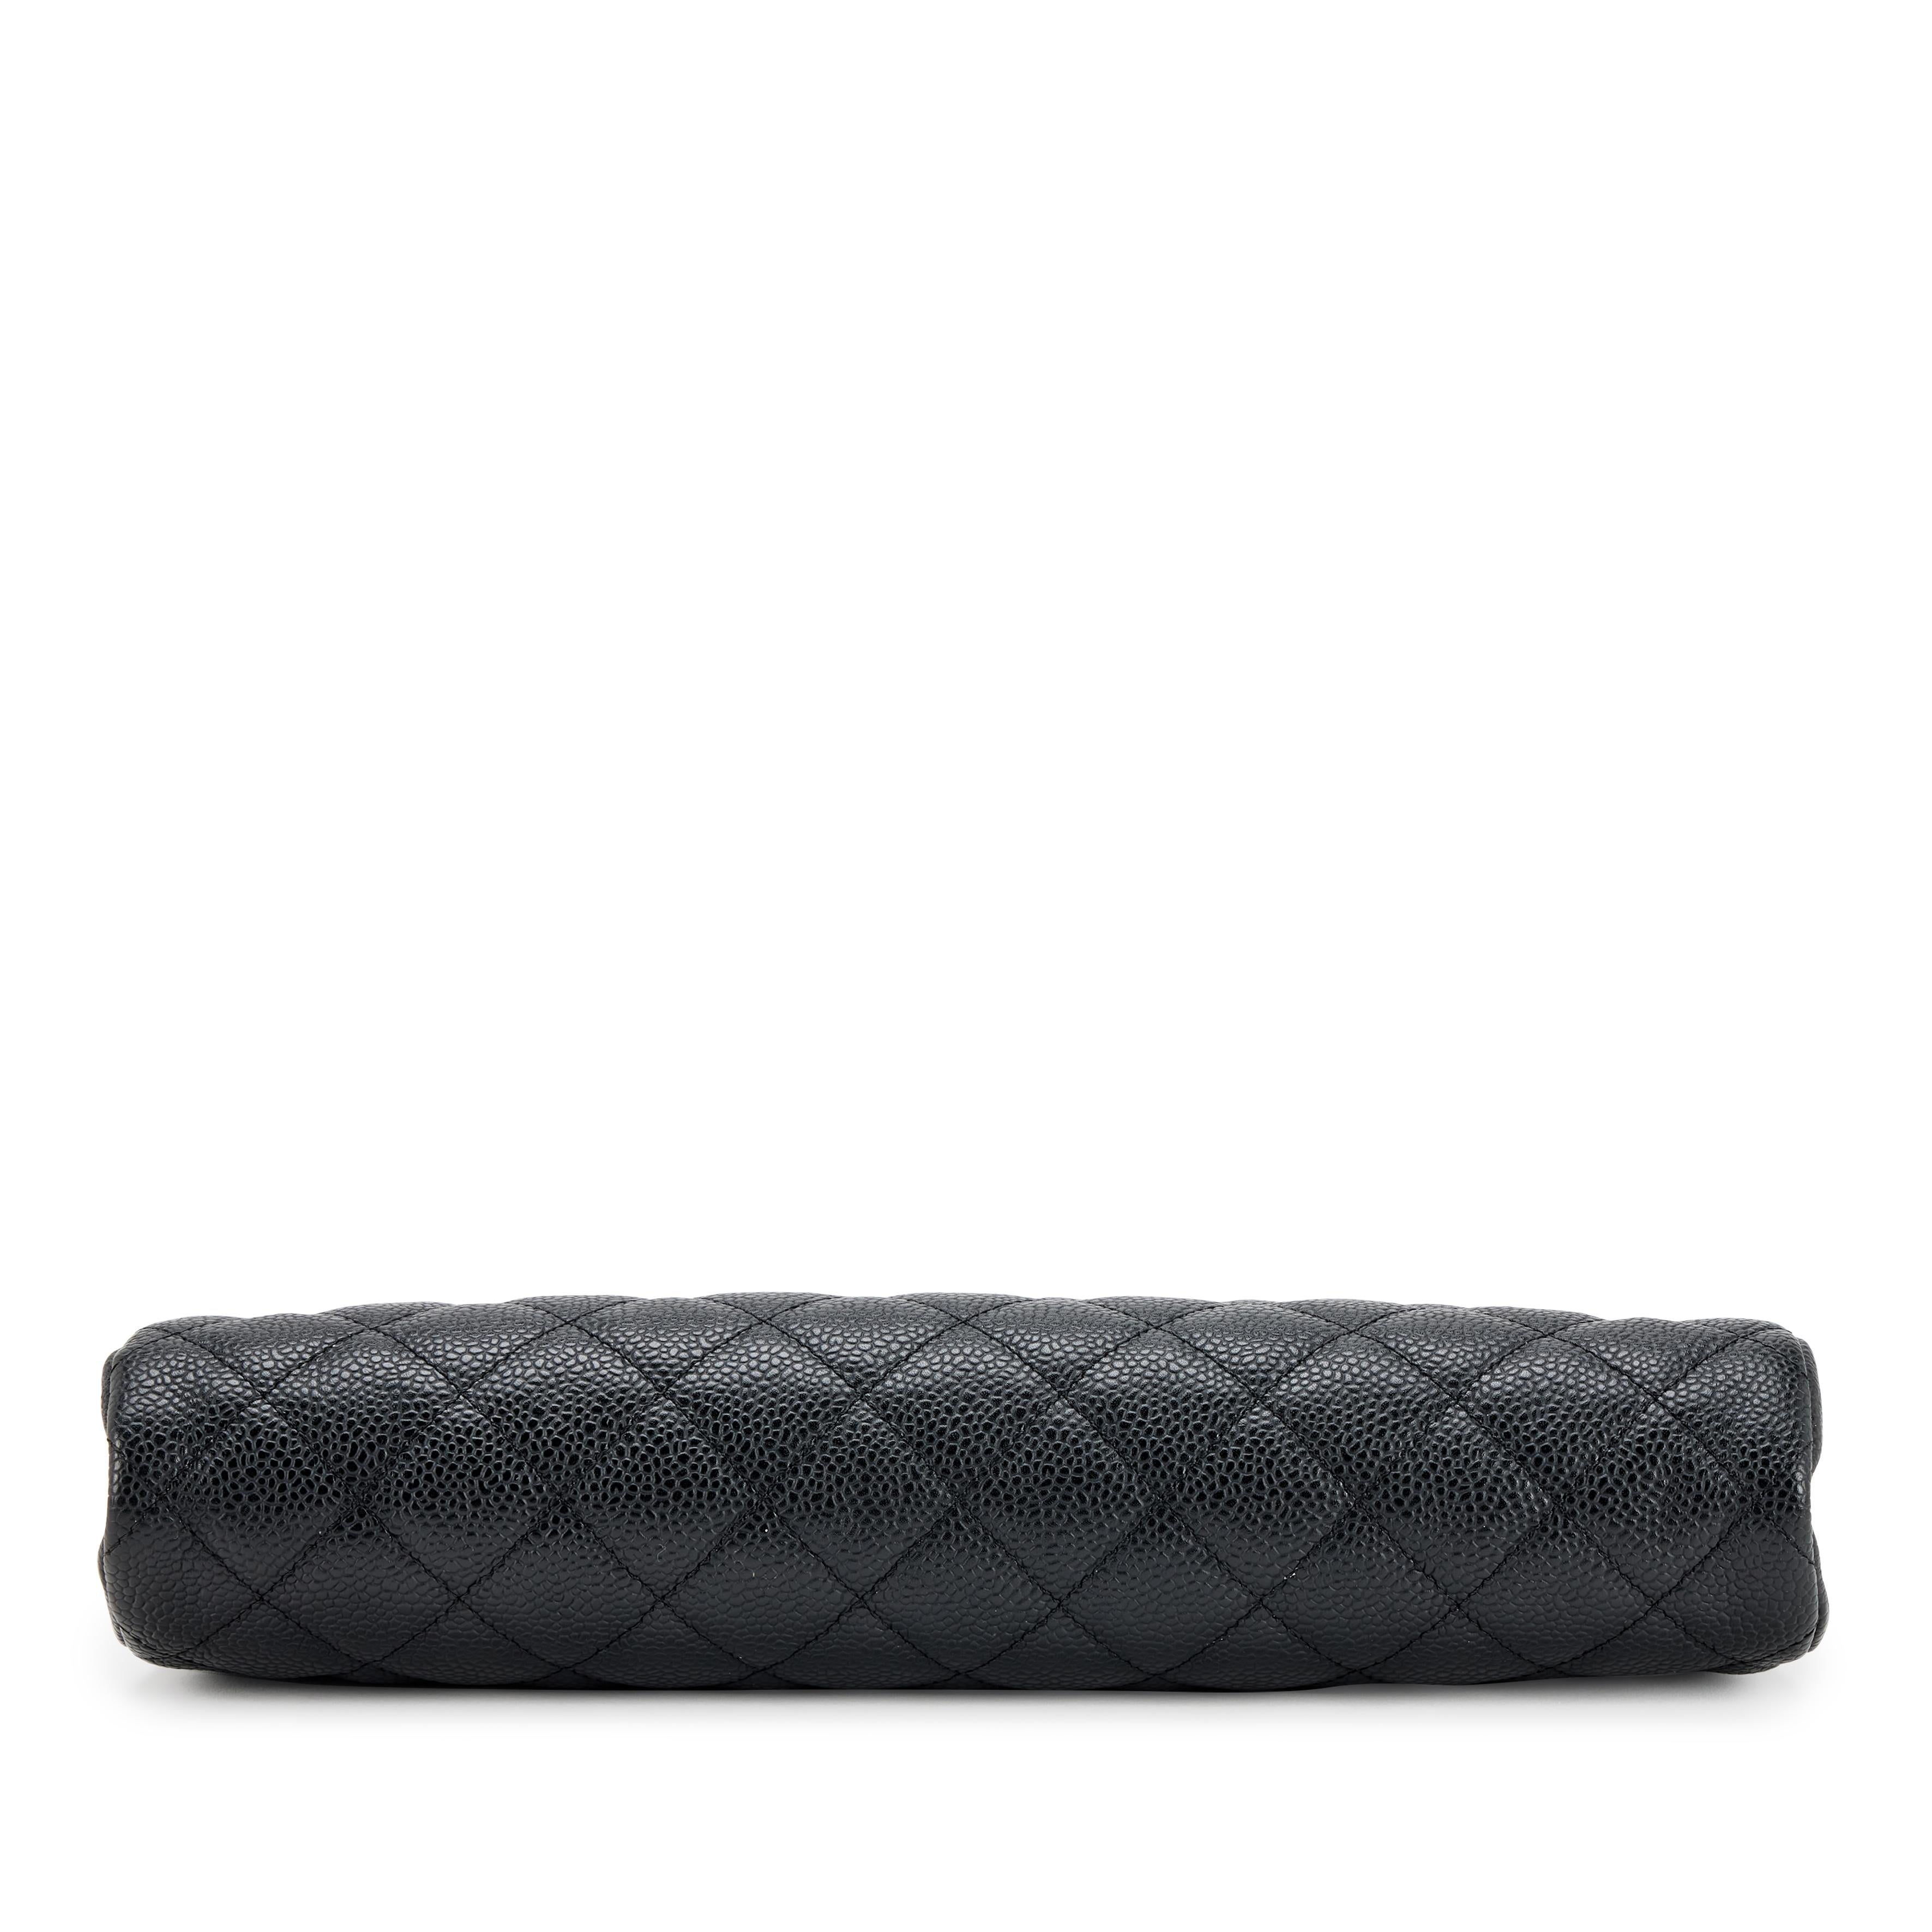 Chanel Classic Vintage Caviar CC Black Diamond Quilted Timeless Clutch Bag For Sale 1